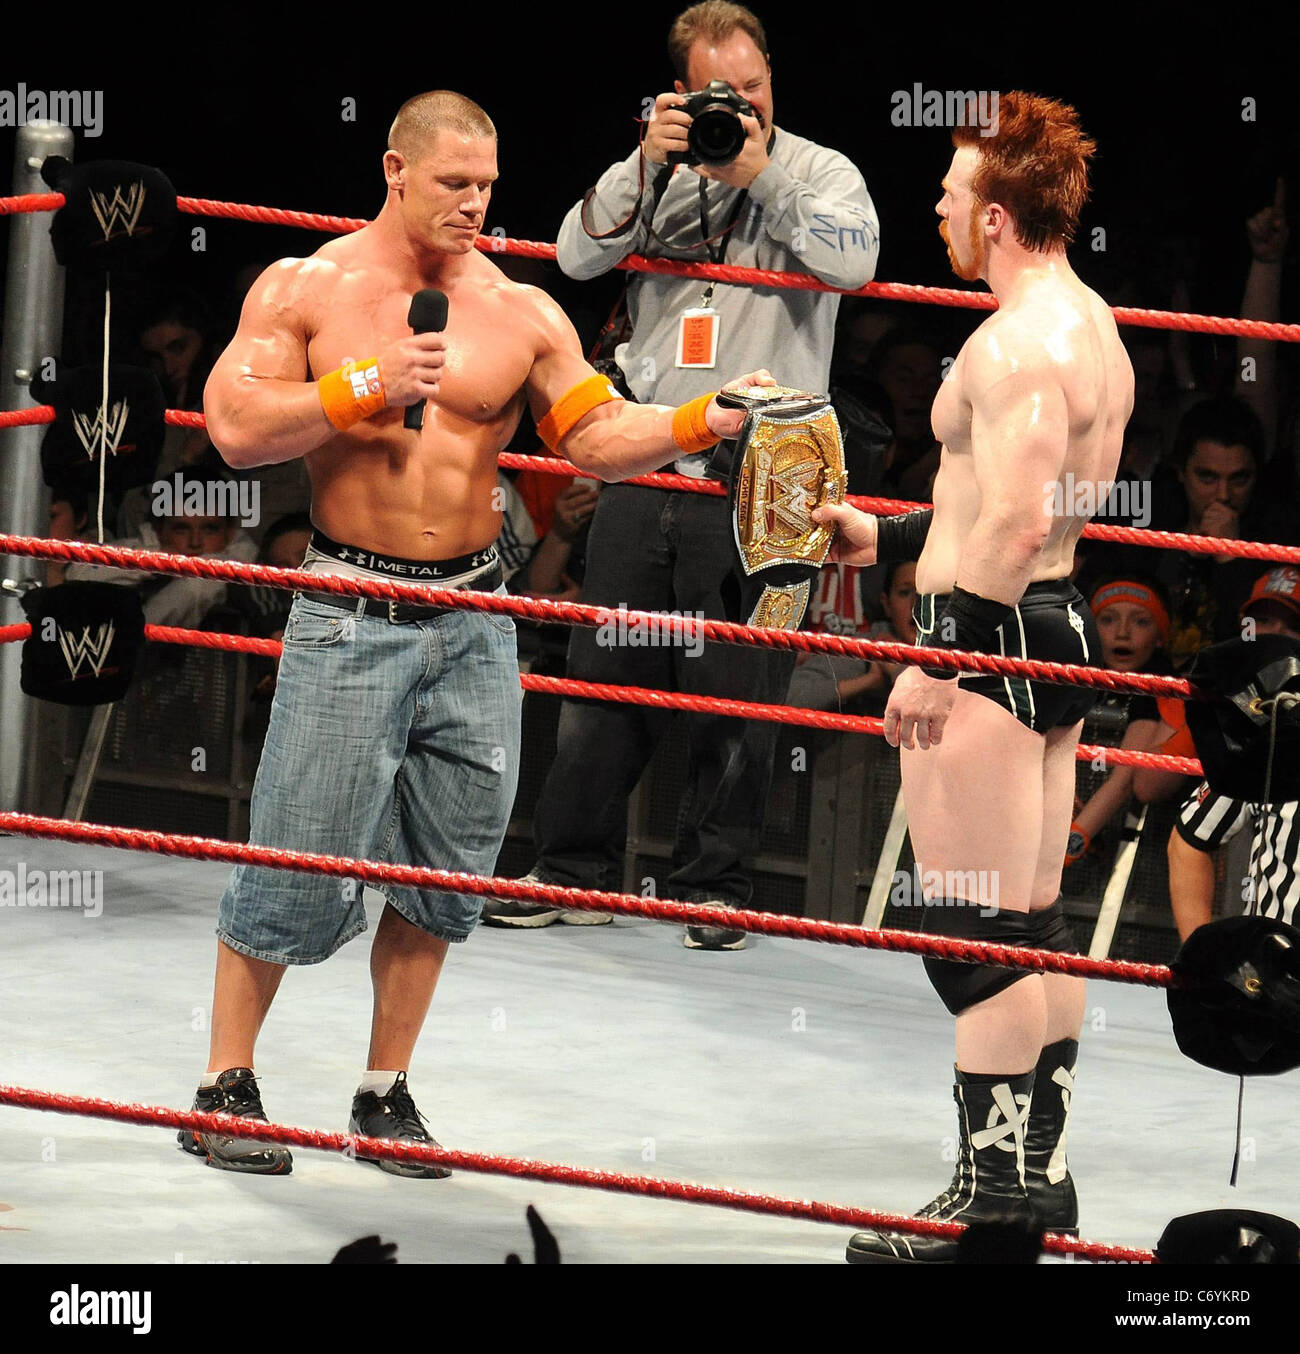 WWE Champion John Cena faced former WWE Champion Sheamus for the title belt at The O2 arena and after long battle Cena won when Stock Photo